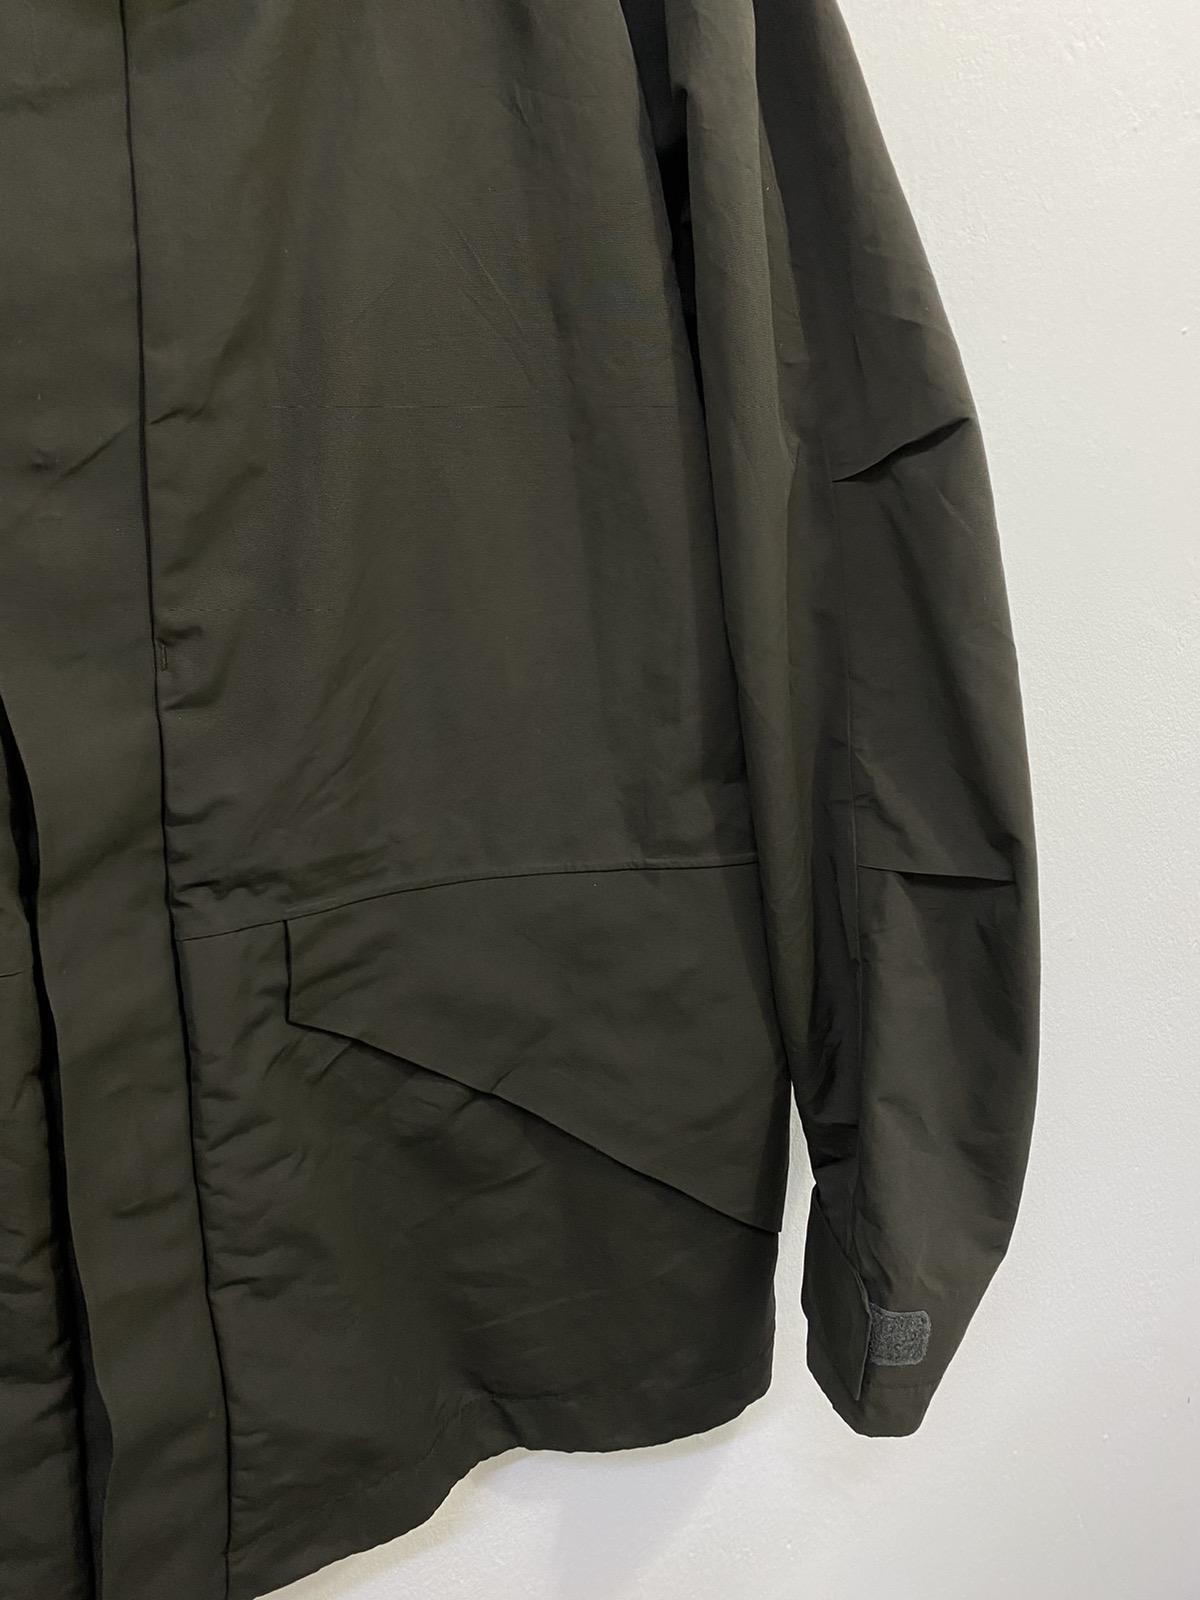 Lemaire X Uniqlo Waterproof Jacket Olive Color with Hoodies - 5